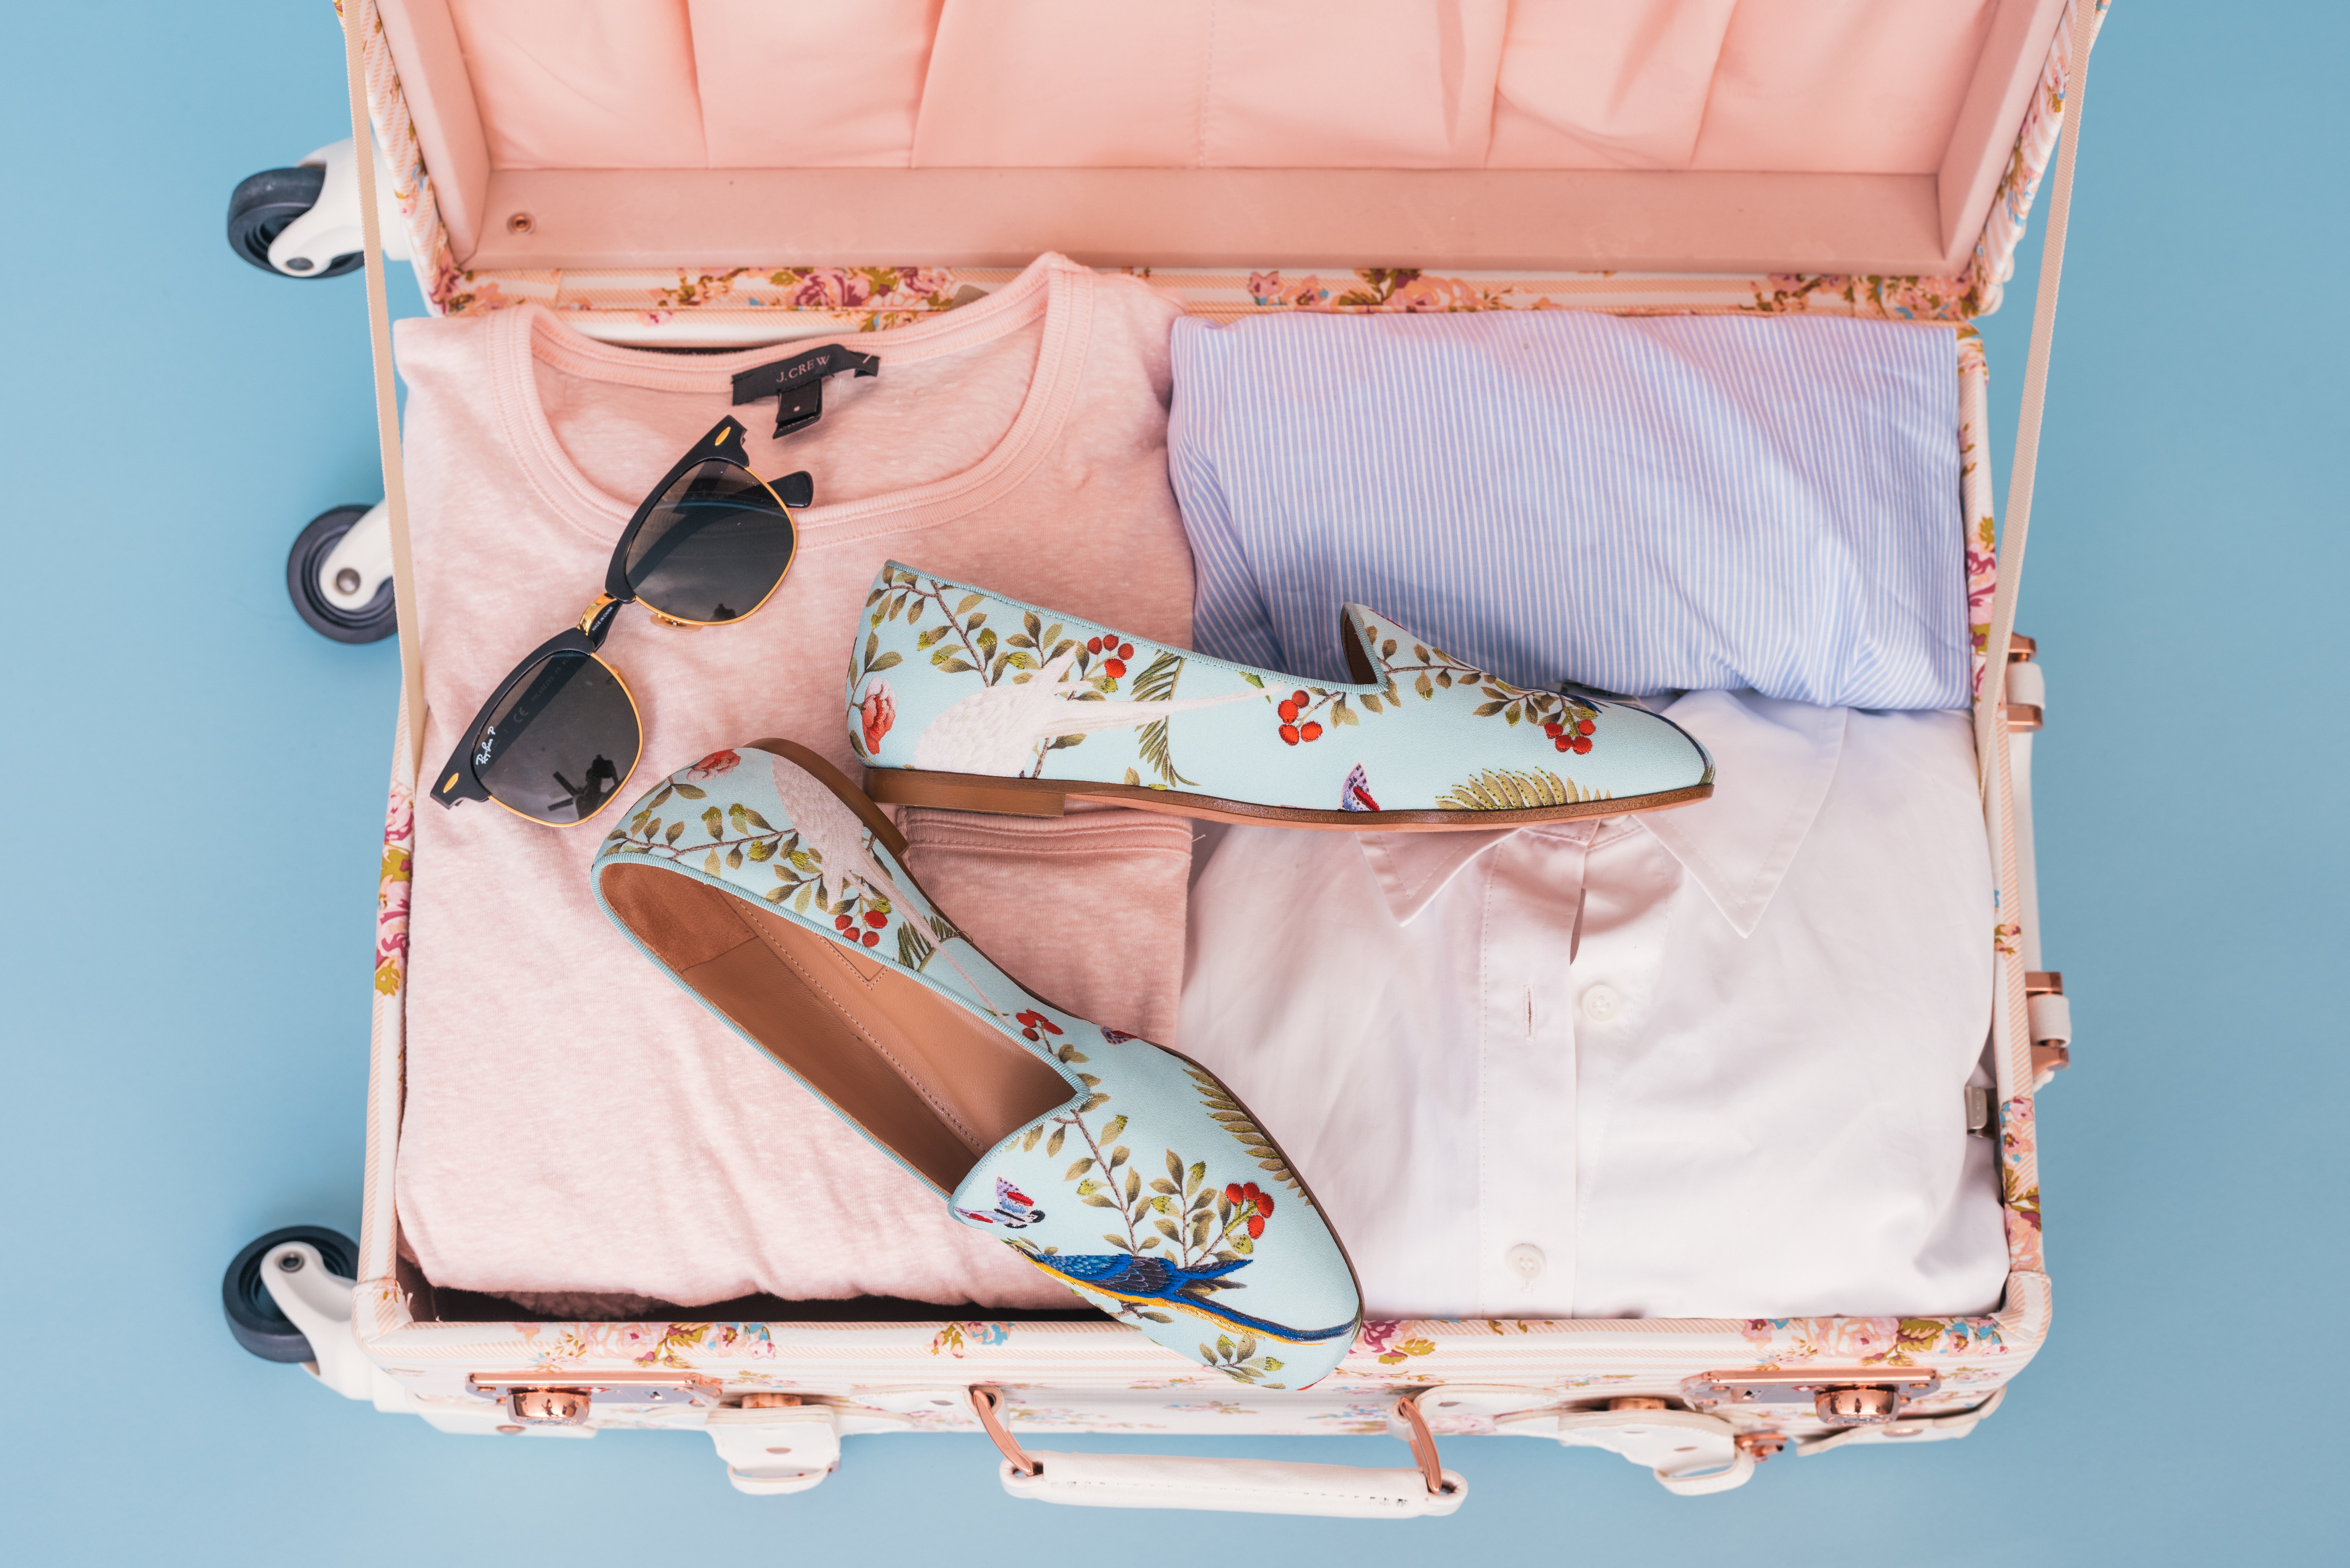 A woman's suitcase containing some pink clothes, a pair of shoes, and sunglasses.